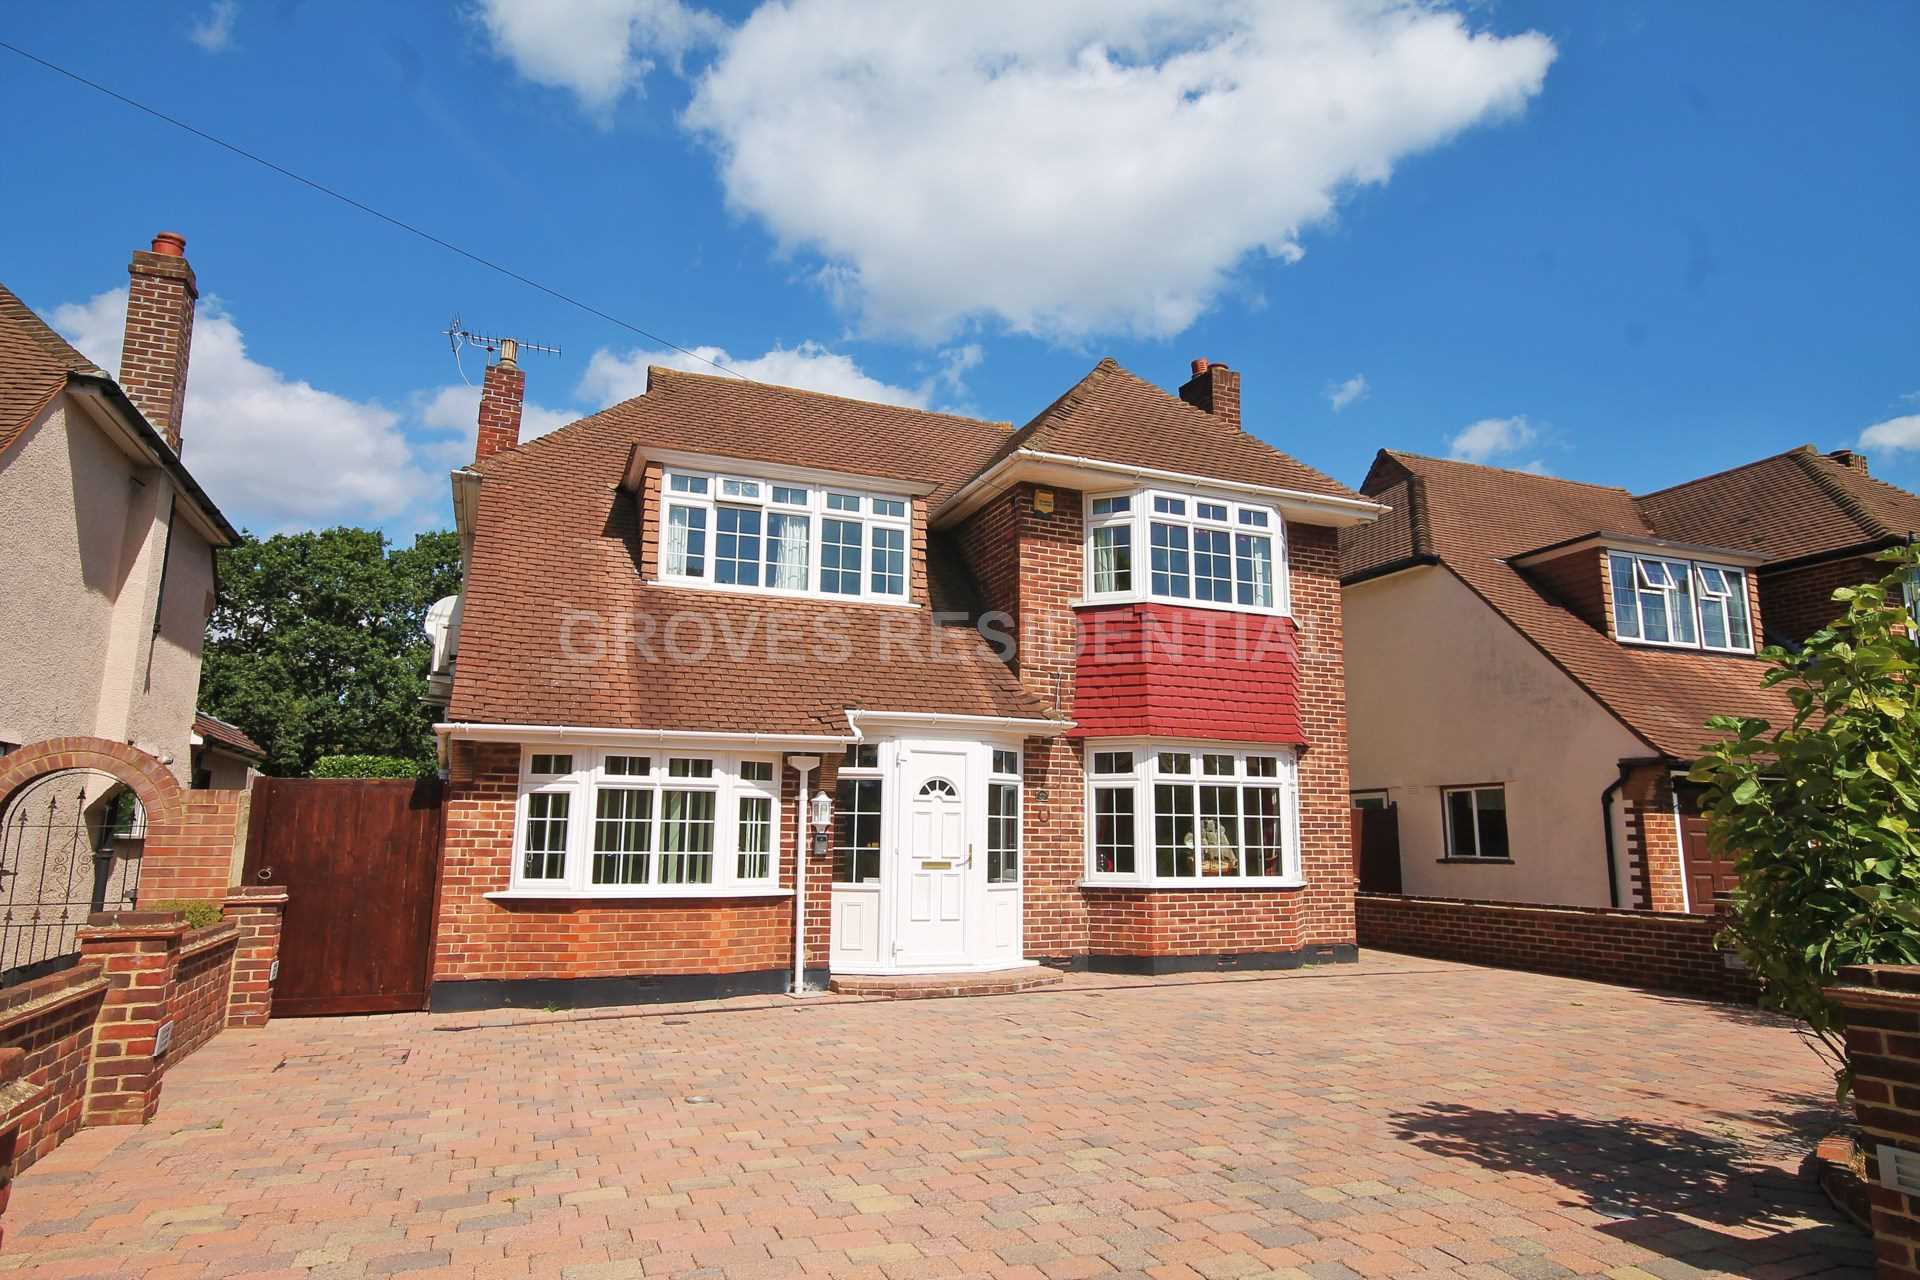 5 bed Detached House for rent in New Malden. From Groves Residential